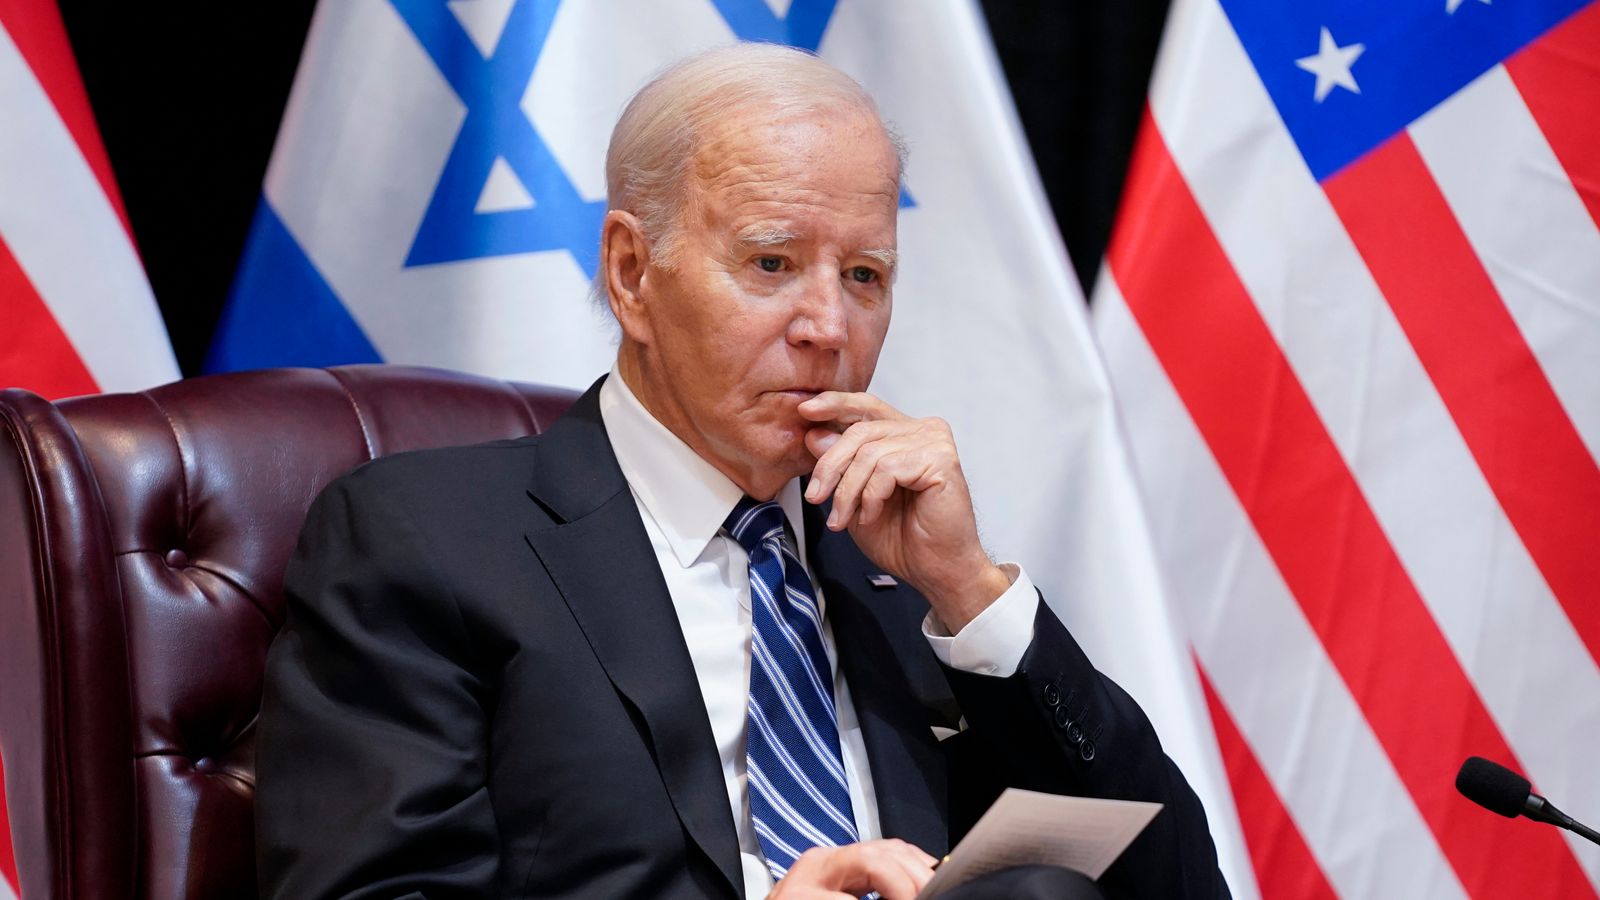 Joe Biden partially lifts ban on Ukraine using US weapons in strikes on Russian territory